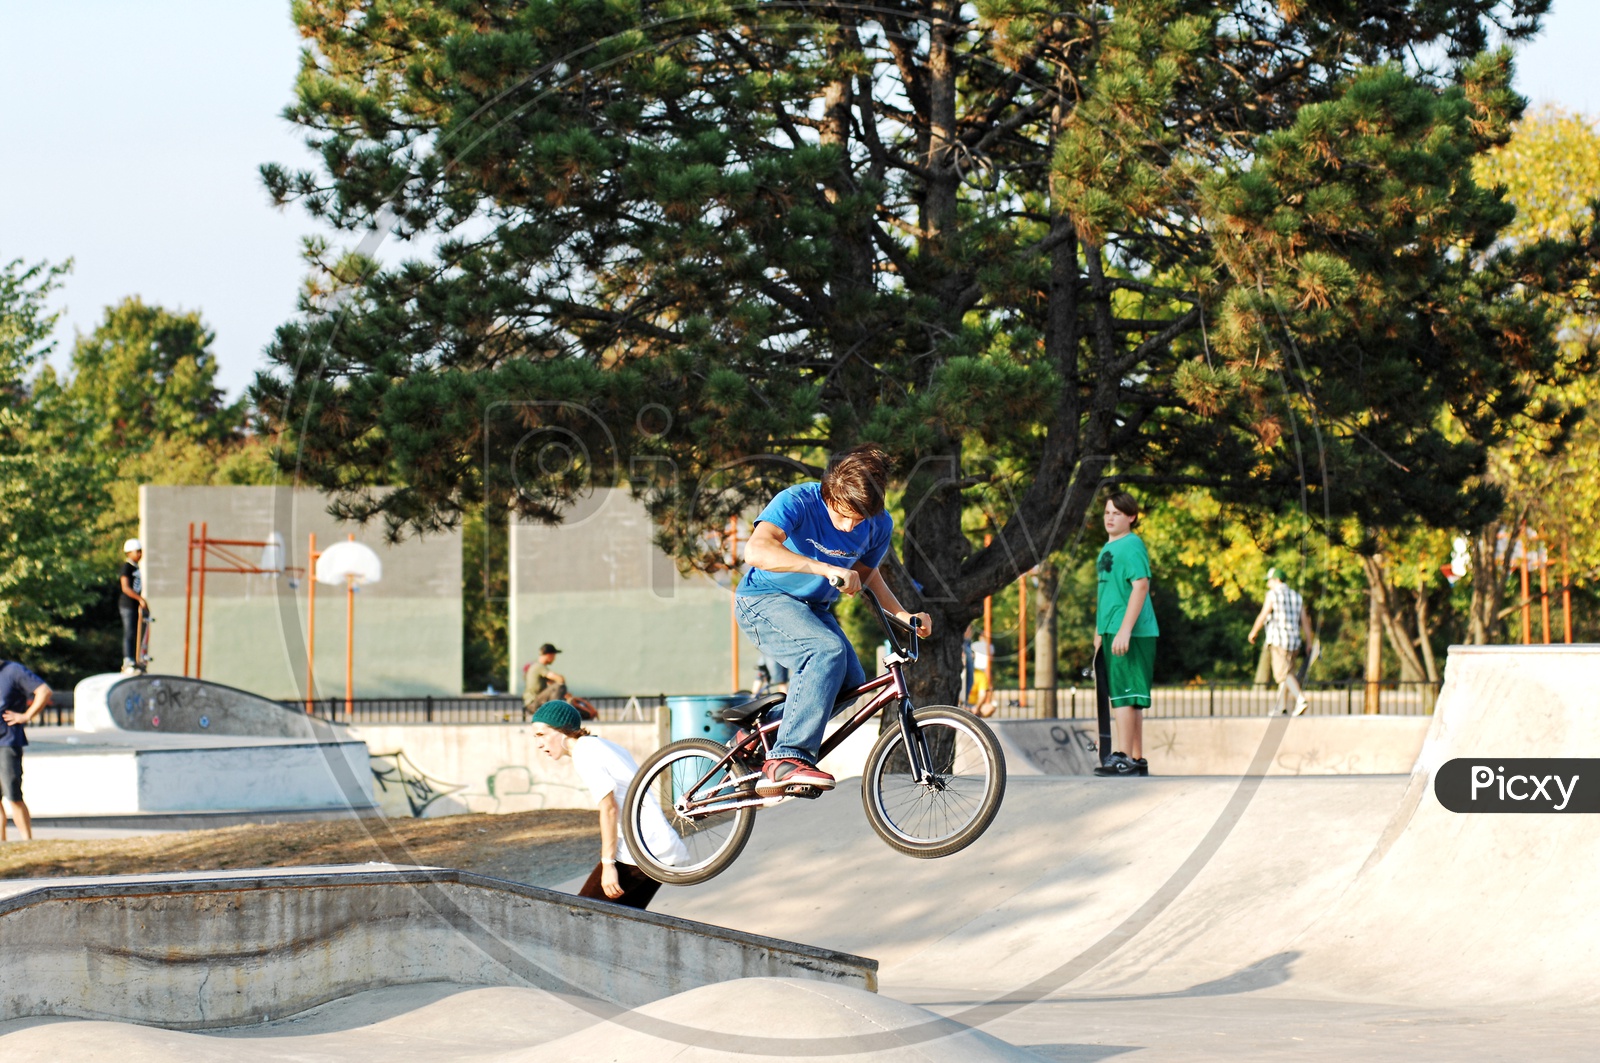 A young boy performing BMX